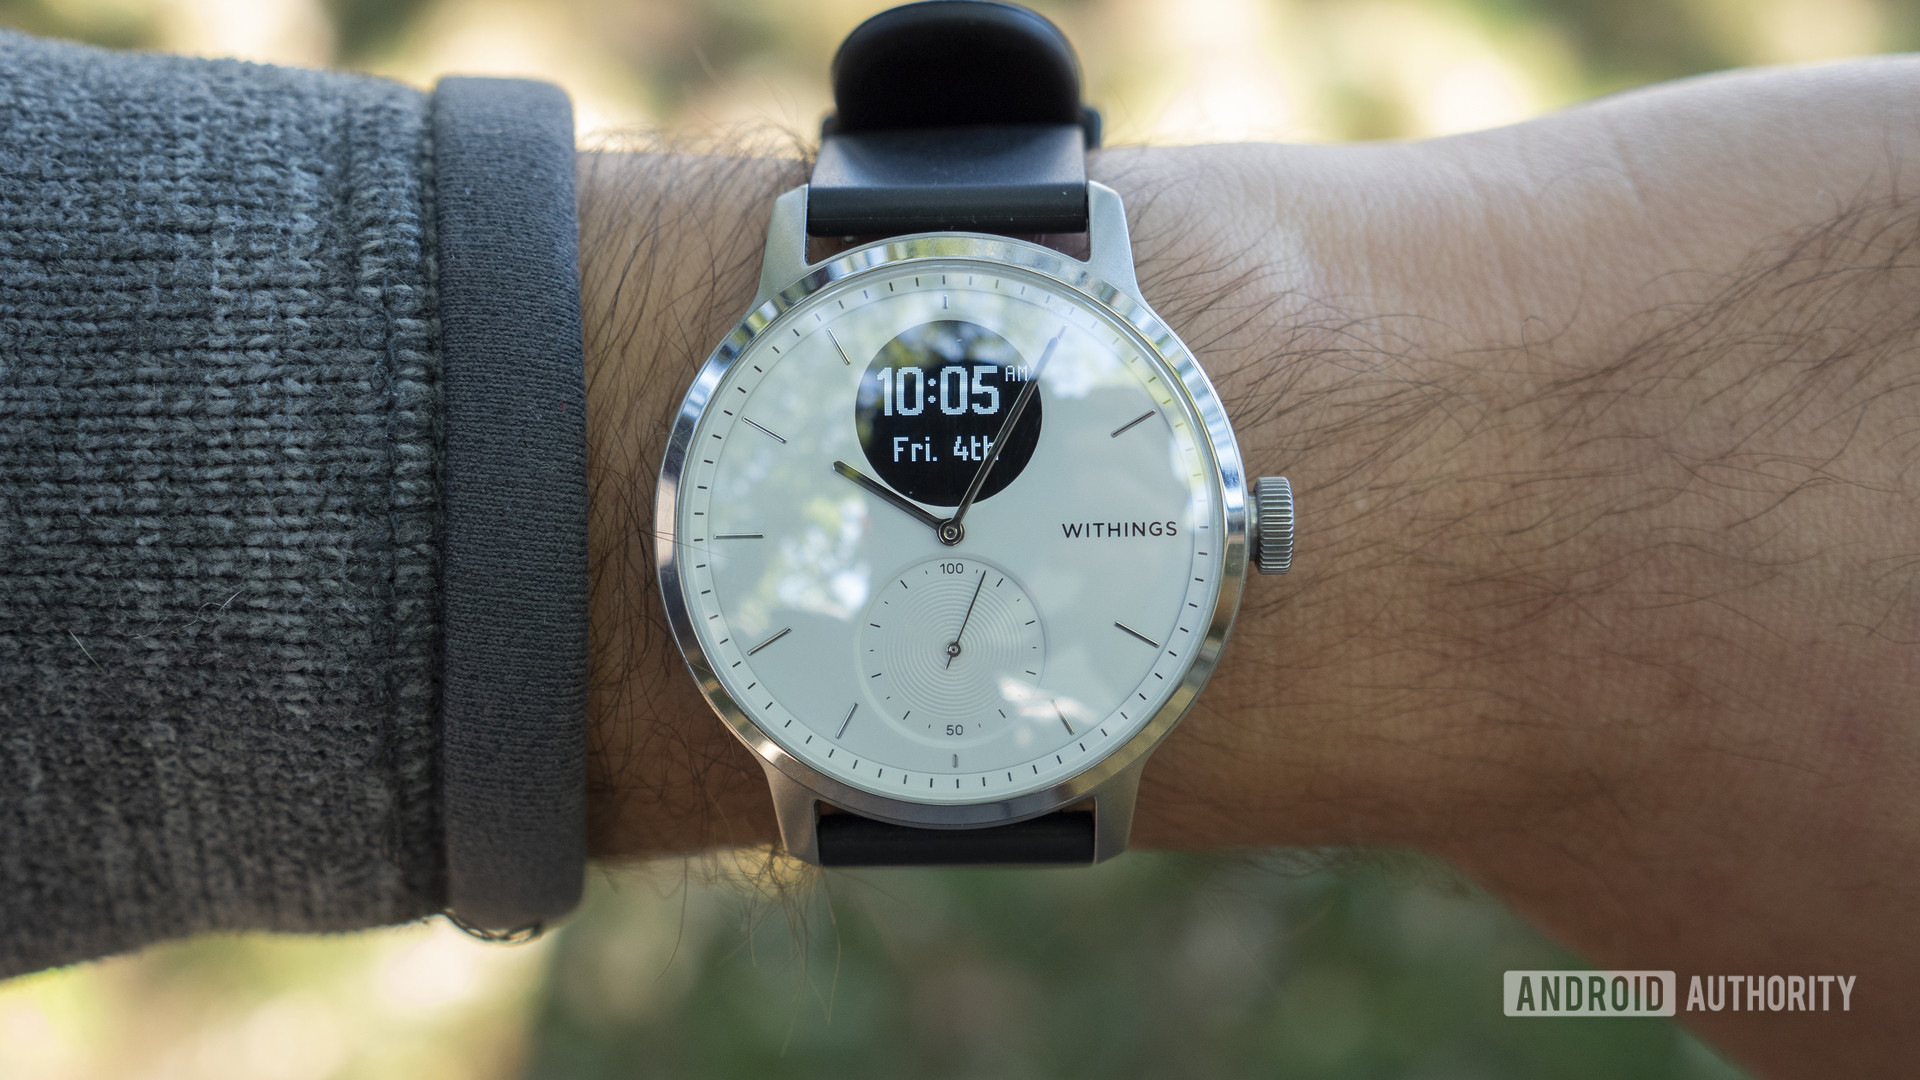 Withings ScanWatch 2 hybrid smartwatch assesses health metrics